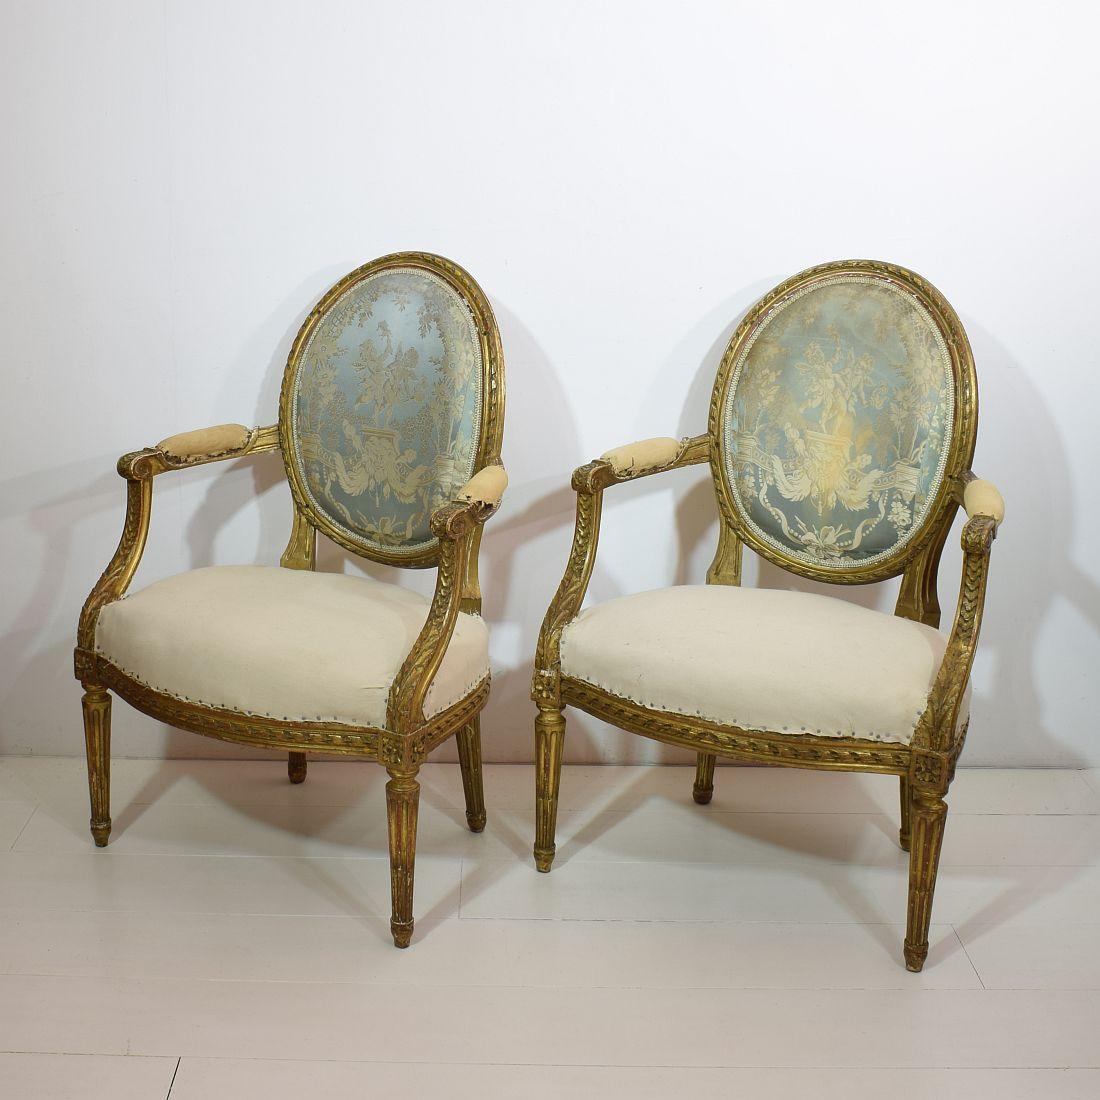 Really stunning pair of Louis XVI style chairs with beautiful weathered gilding
France, circa 1880. Despite of their age, the chairs are in a good condition but of course need new lining.
Seat height is 41 cm. Weathered, small losses and old